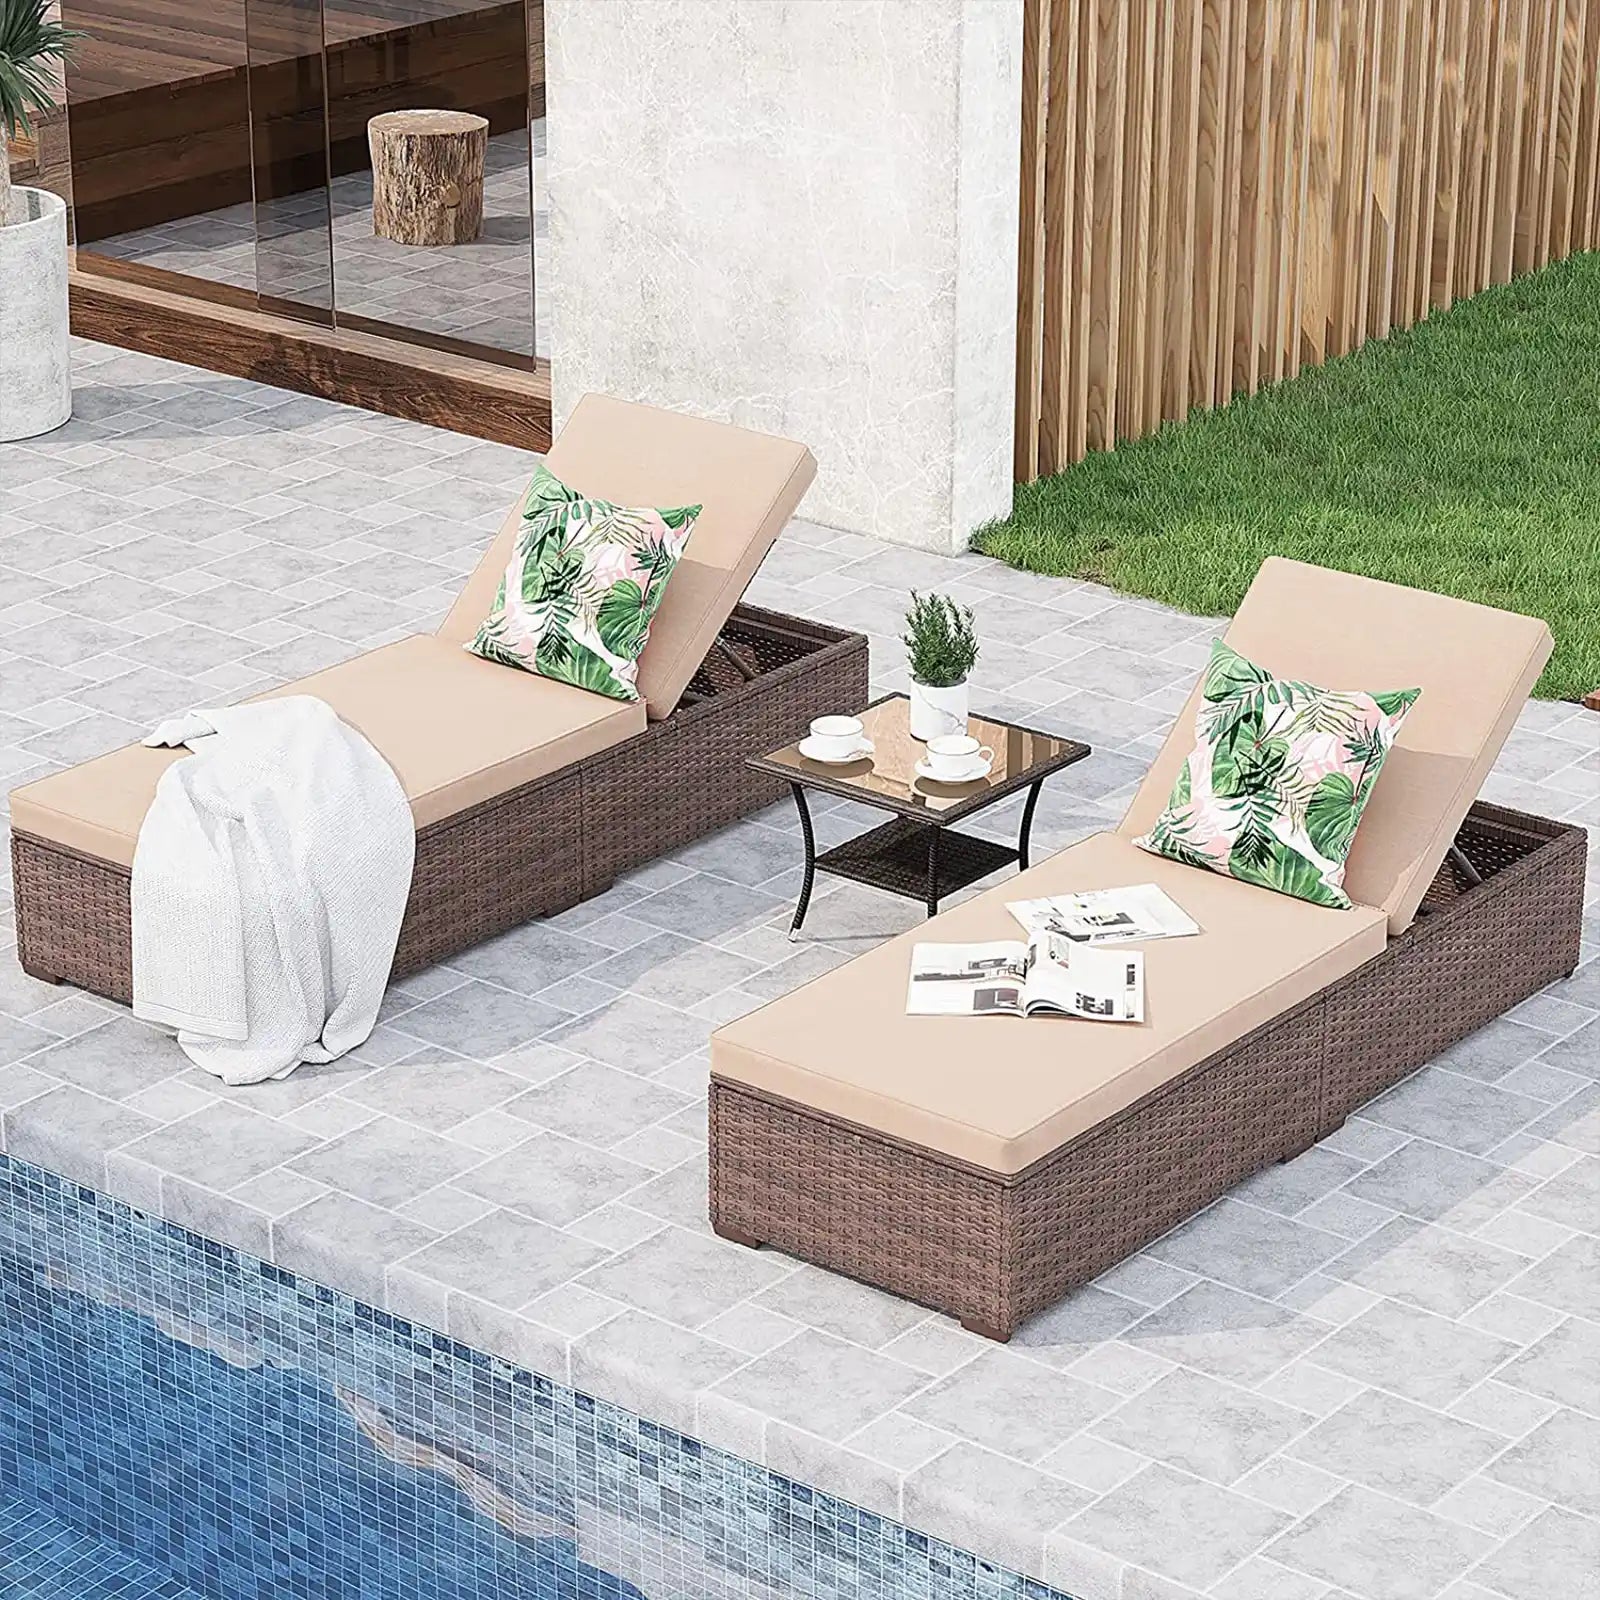 Outdoor Chaise Lounge Chair, Patio Reclining Sun Lounger, Brown Wicker Rattan Adjustable Lounge Chair, Steel Frame with Removable Beige Cushions, for Poolside, Deck and Backyard